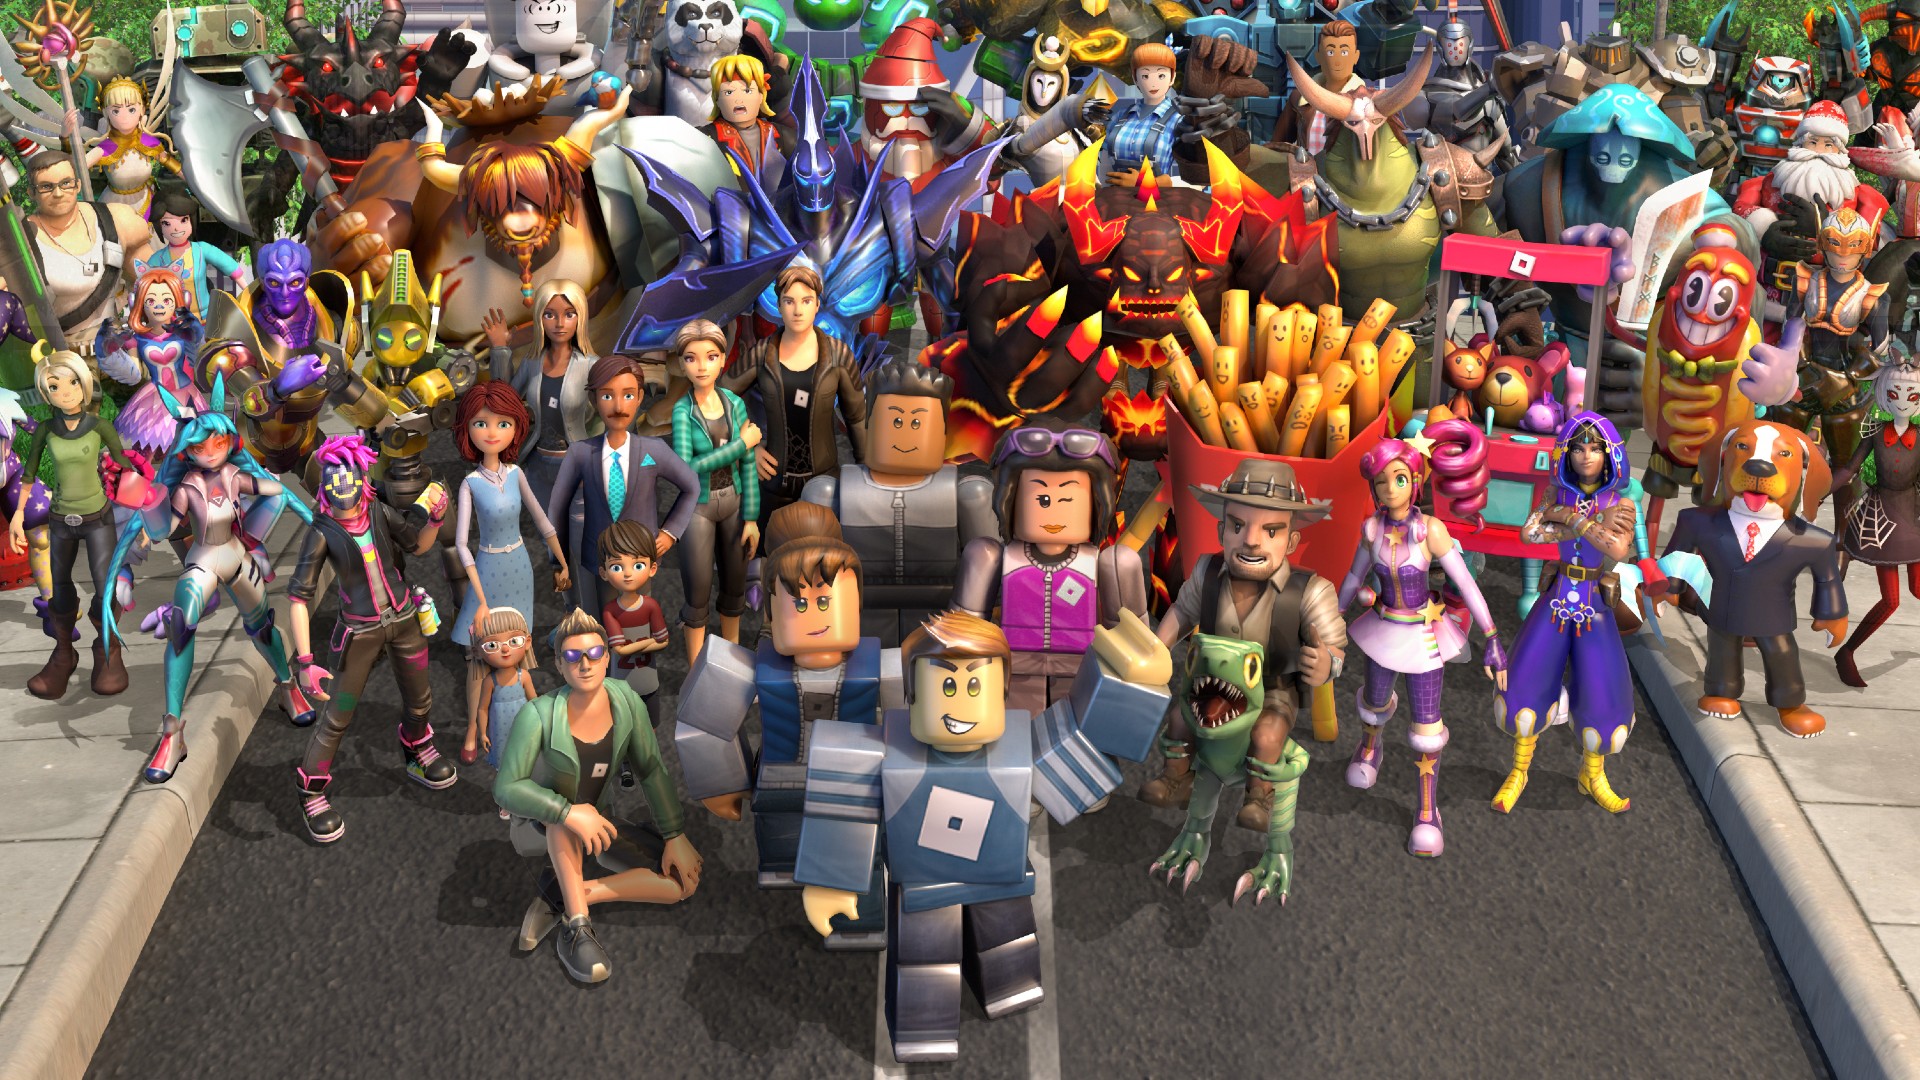 JustJoe84 Games - Roblox is an online game platform and